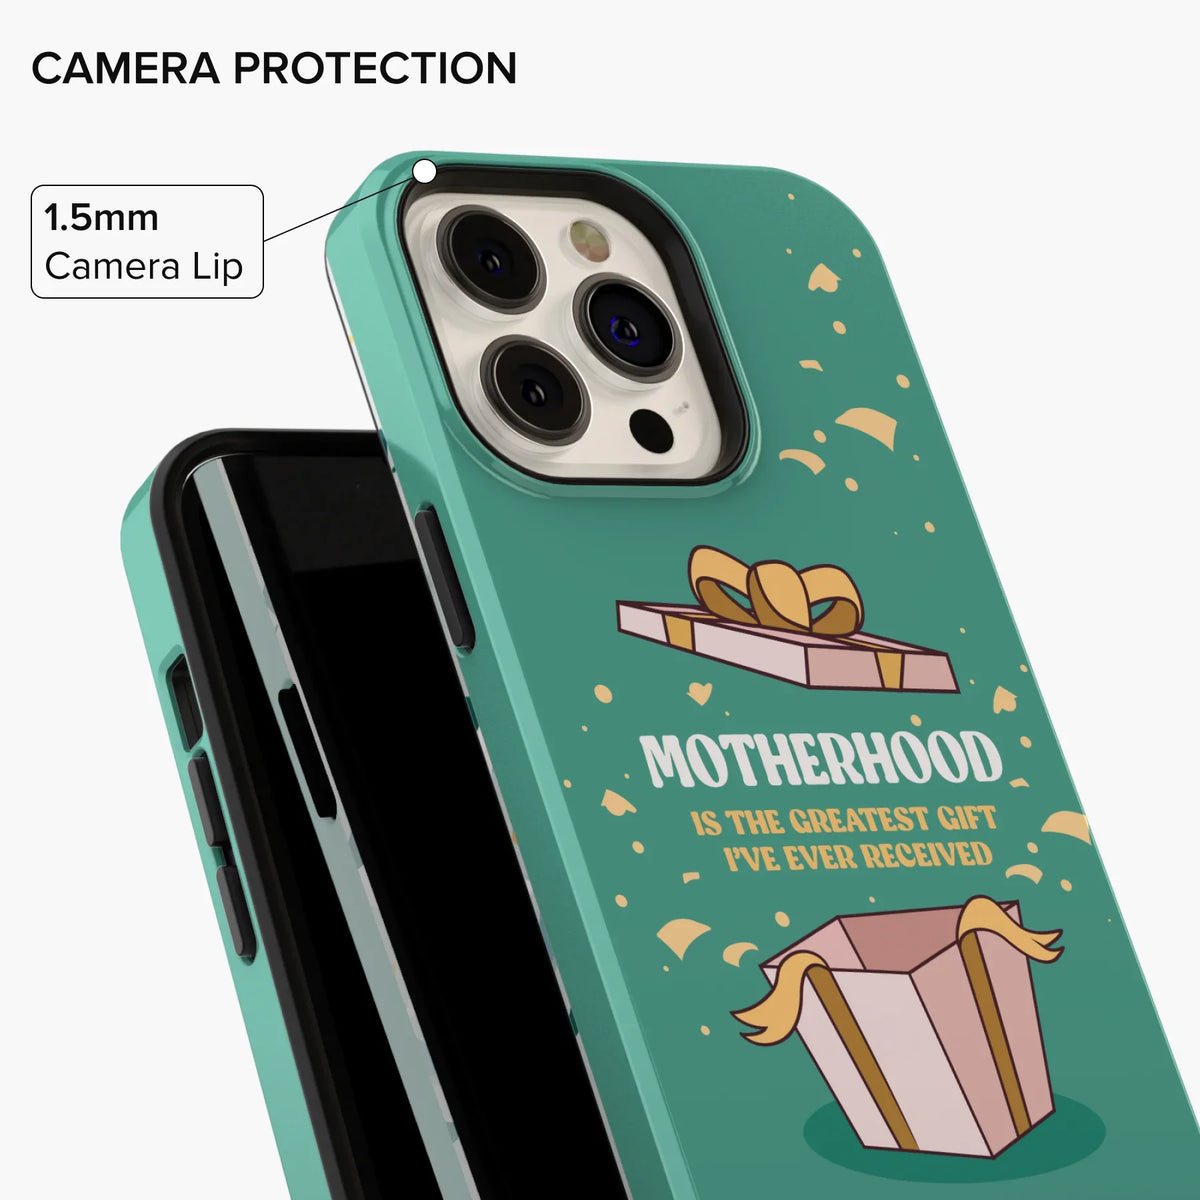 Motherhood Is The Greatest Gift iPhone Case - iPhone 12 Pro Max